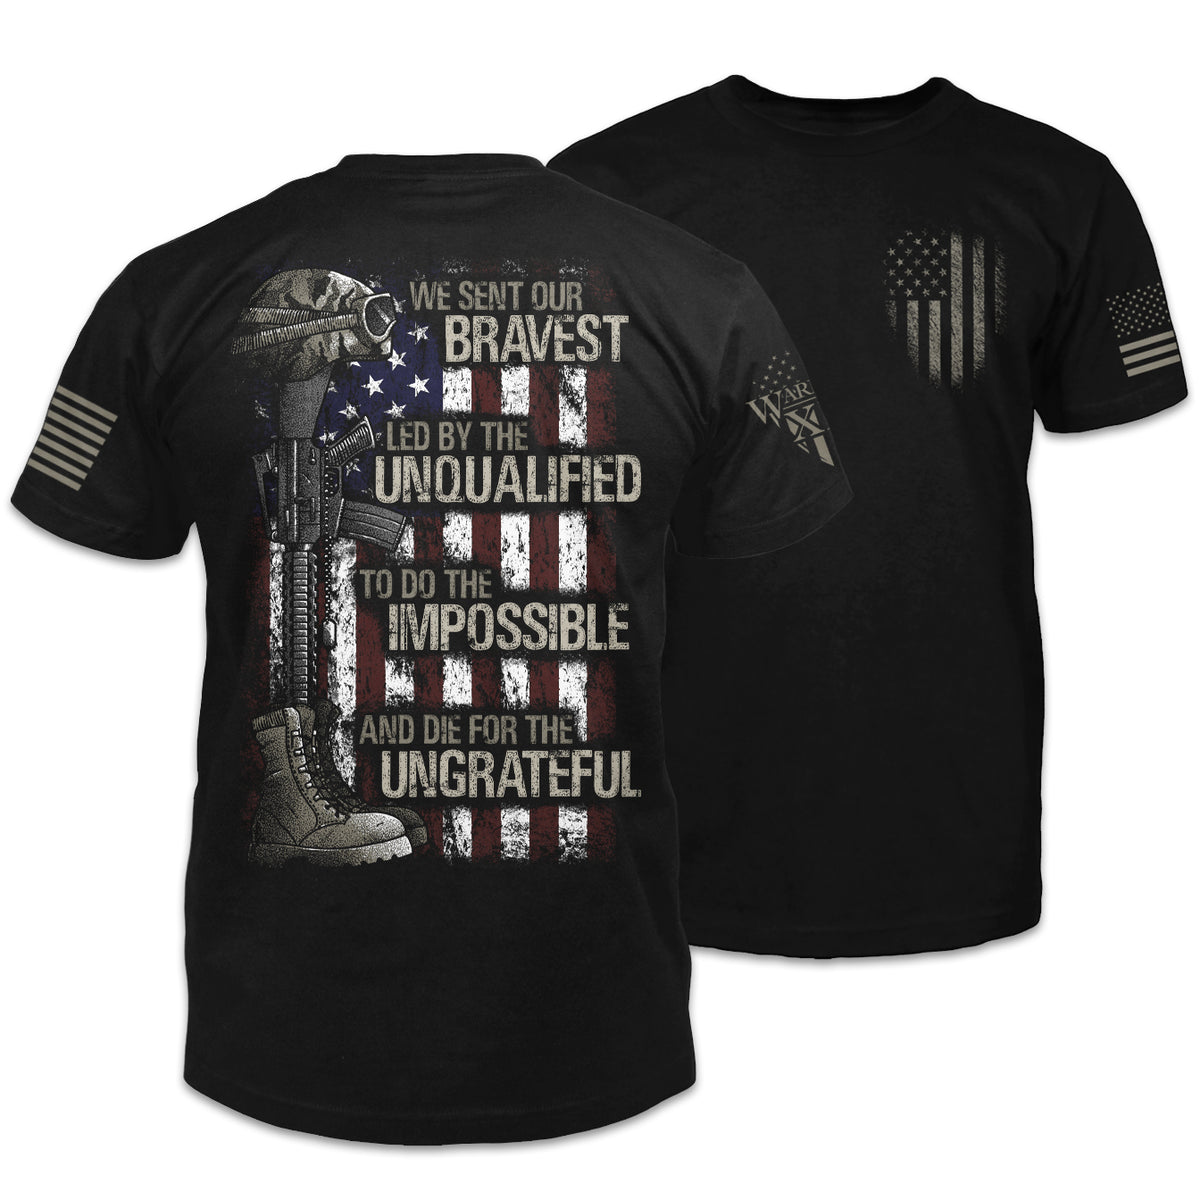 Front & back black t-shirt with the words "We sent our bravest, Led by the unqualified, To do the impossible, And die for the ungrateful" with a USA flag, soldiers boot, helmet and gun printed on the shirt.